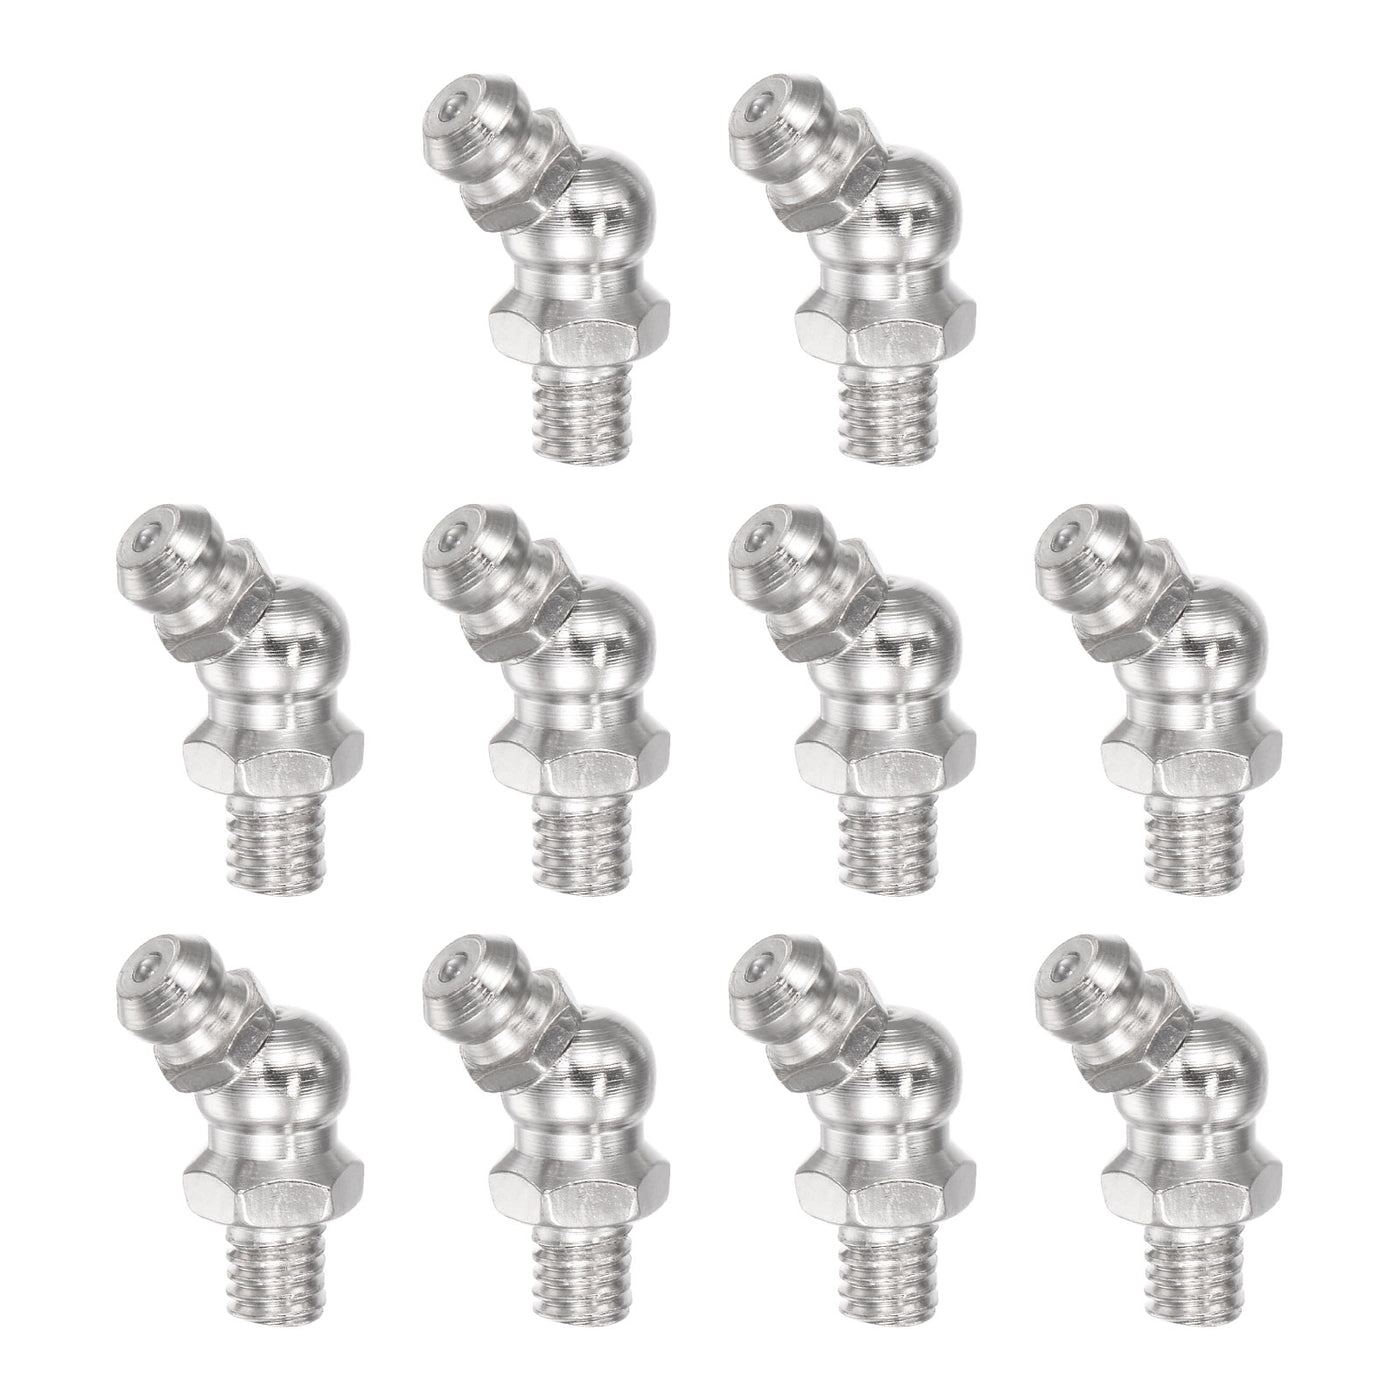 Uxcell Uxcell Nickel-Plated Iron 45 Degree Hydraulic Grease Fitting M10 x 1mm Thread, 20Pcs